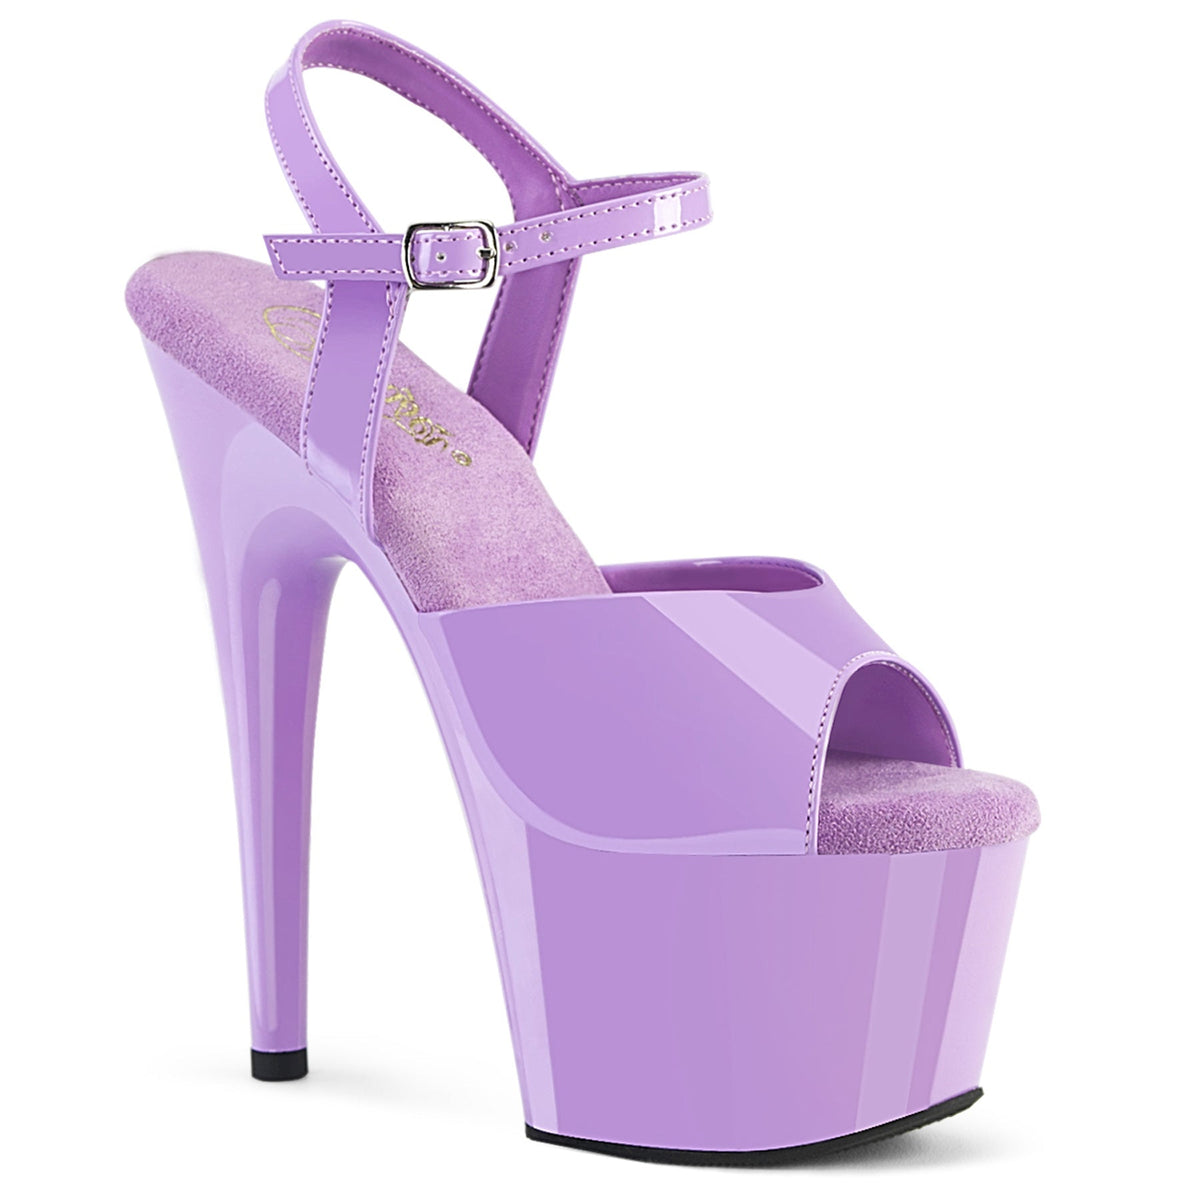 Clearance Pleaser Adore 709 Lavender Patent Size 4UK/7USA